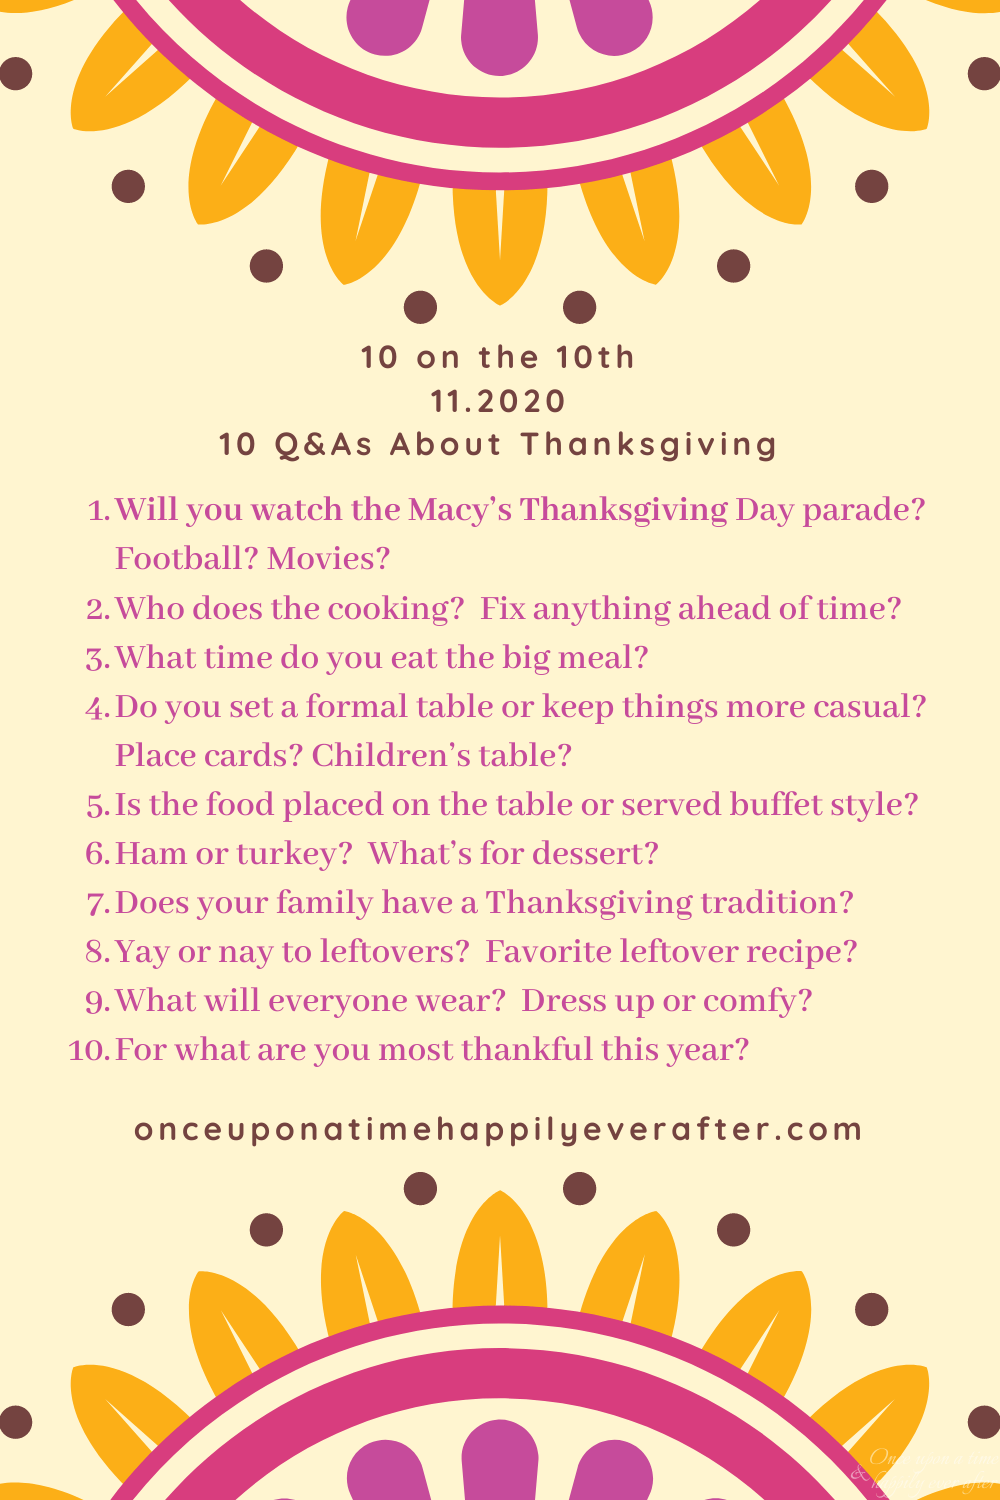 10 Questions about Thanksgiving: 10 on the 10th